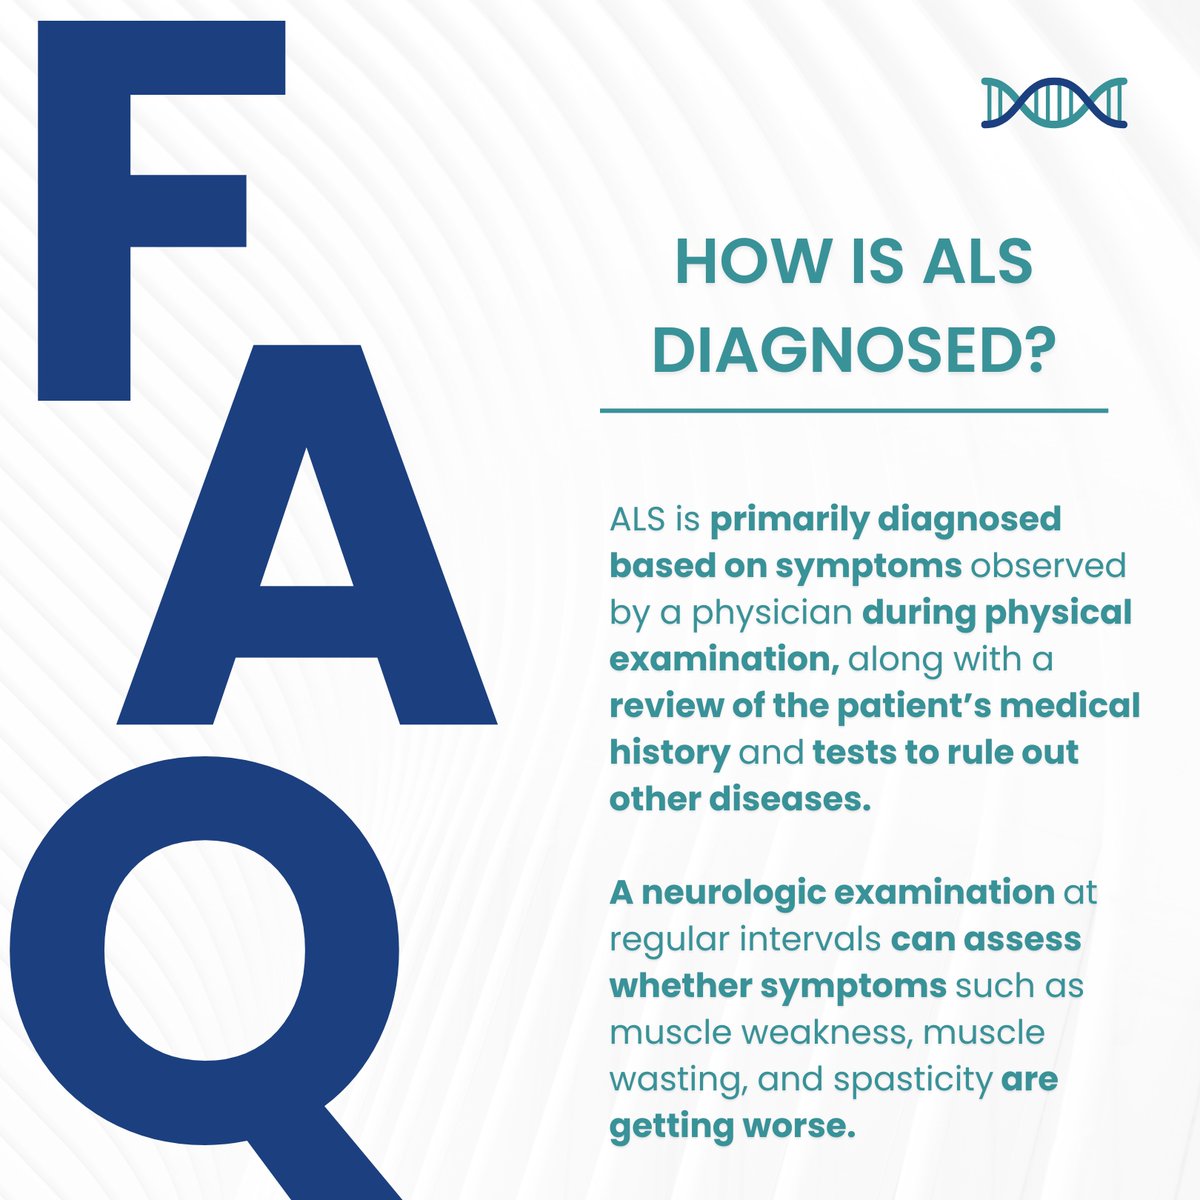 How is ALS diagnosed? #ALS is primarily diagnosed based on symptoms observed by a physician during physical examination, along with a review of the patient’s medical history and tests to rule out other diseases. Read more ALS FAQs: targetals.org/faq/ #ALSFacts #ALSFAQ